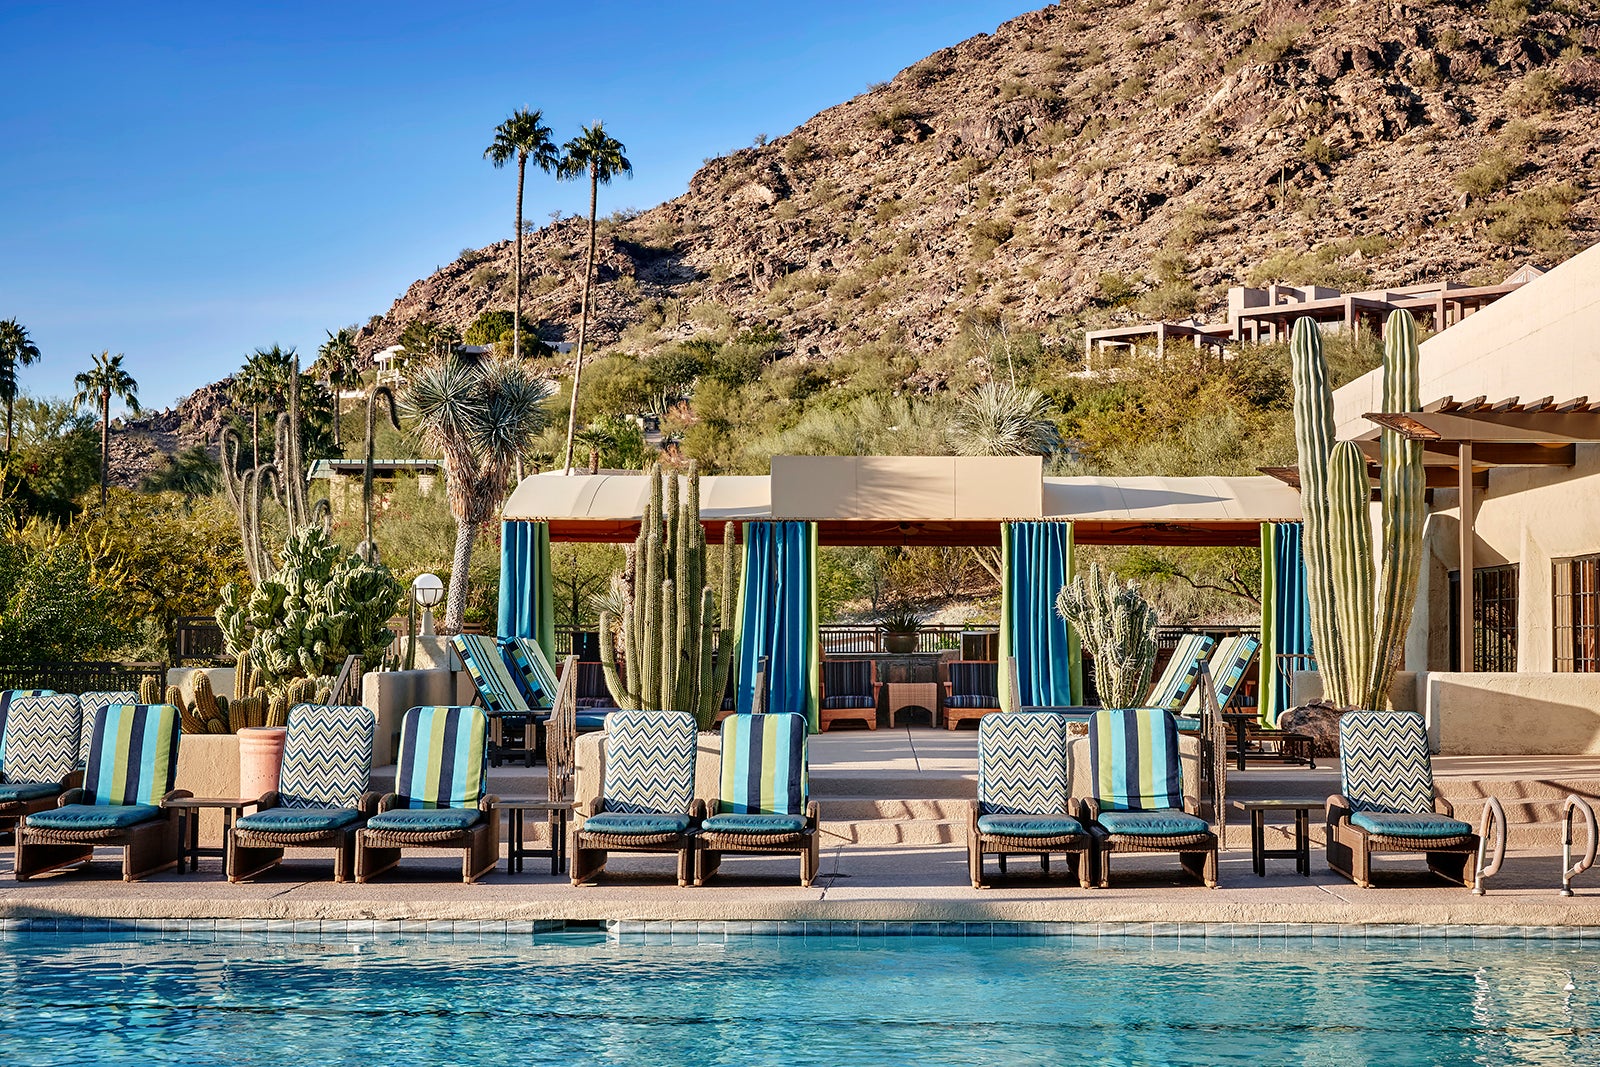 JW Marriott Las Vegas Resort & Spa Review: What To REALLY Expect